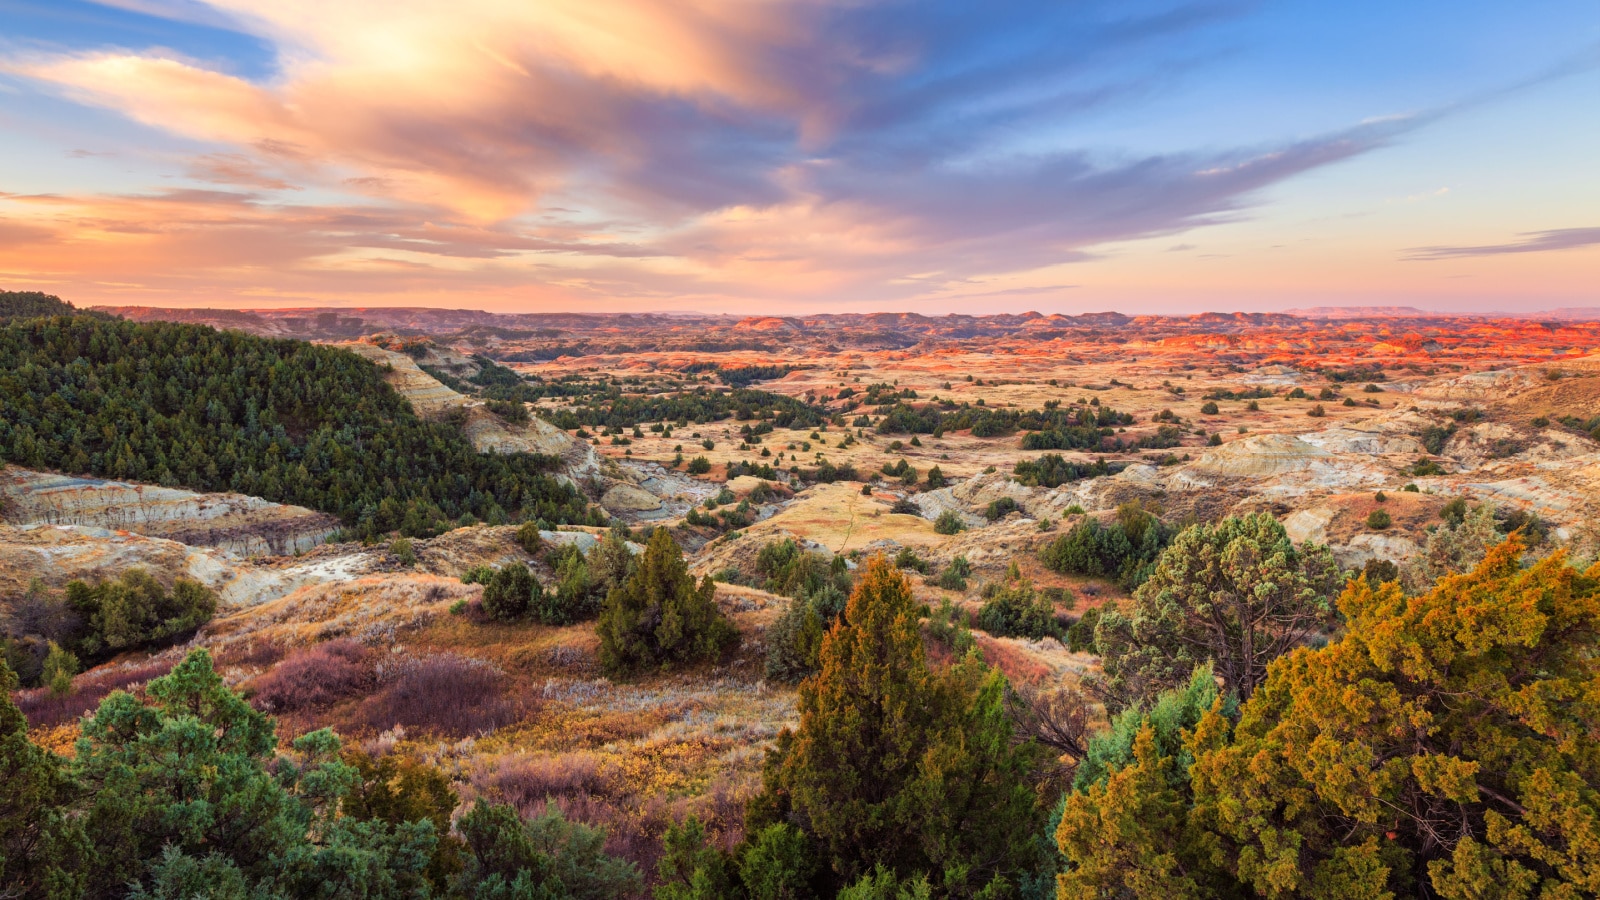 <p>Named after the conservationist president, this park showcases the rugged Badlands, native grasslands, and diverse wildlife, providing opportunities for hiking and wildlife watching.</p>